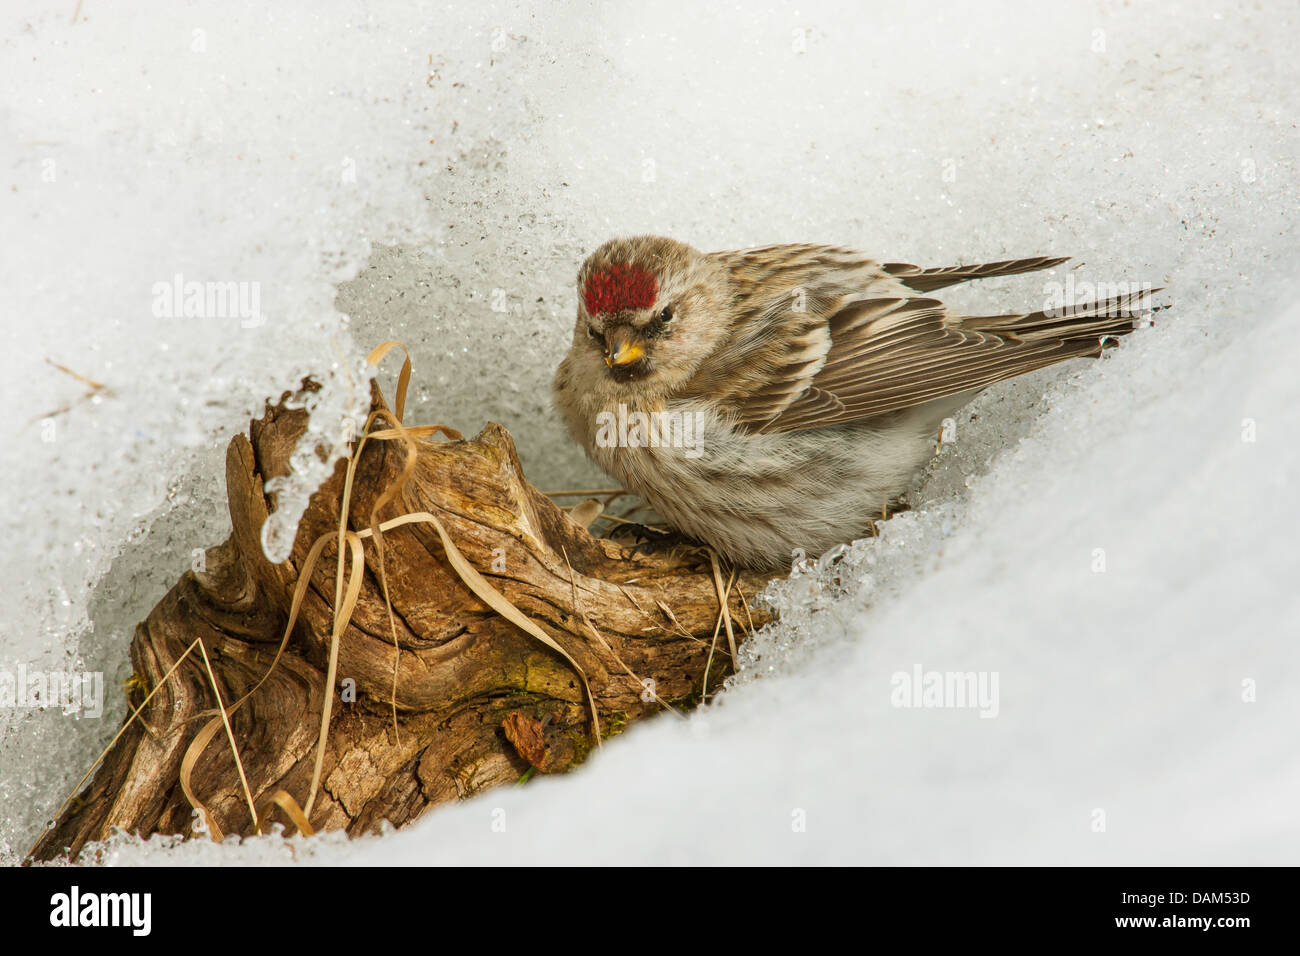 redpoll, common redpoll (Carduelis flammea, Acanthis flammea), on the feed in snow at a tree root, Sweden, Hamra National Park Stock Photo